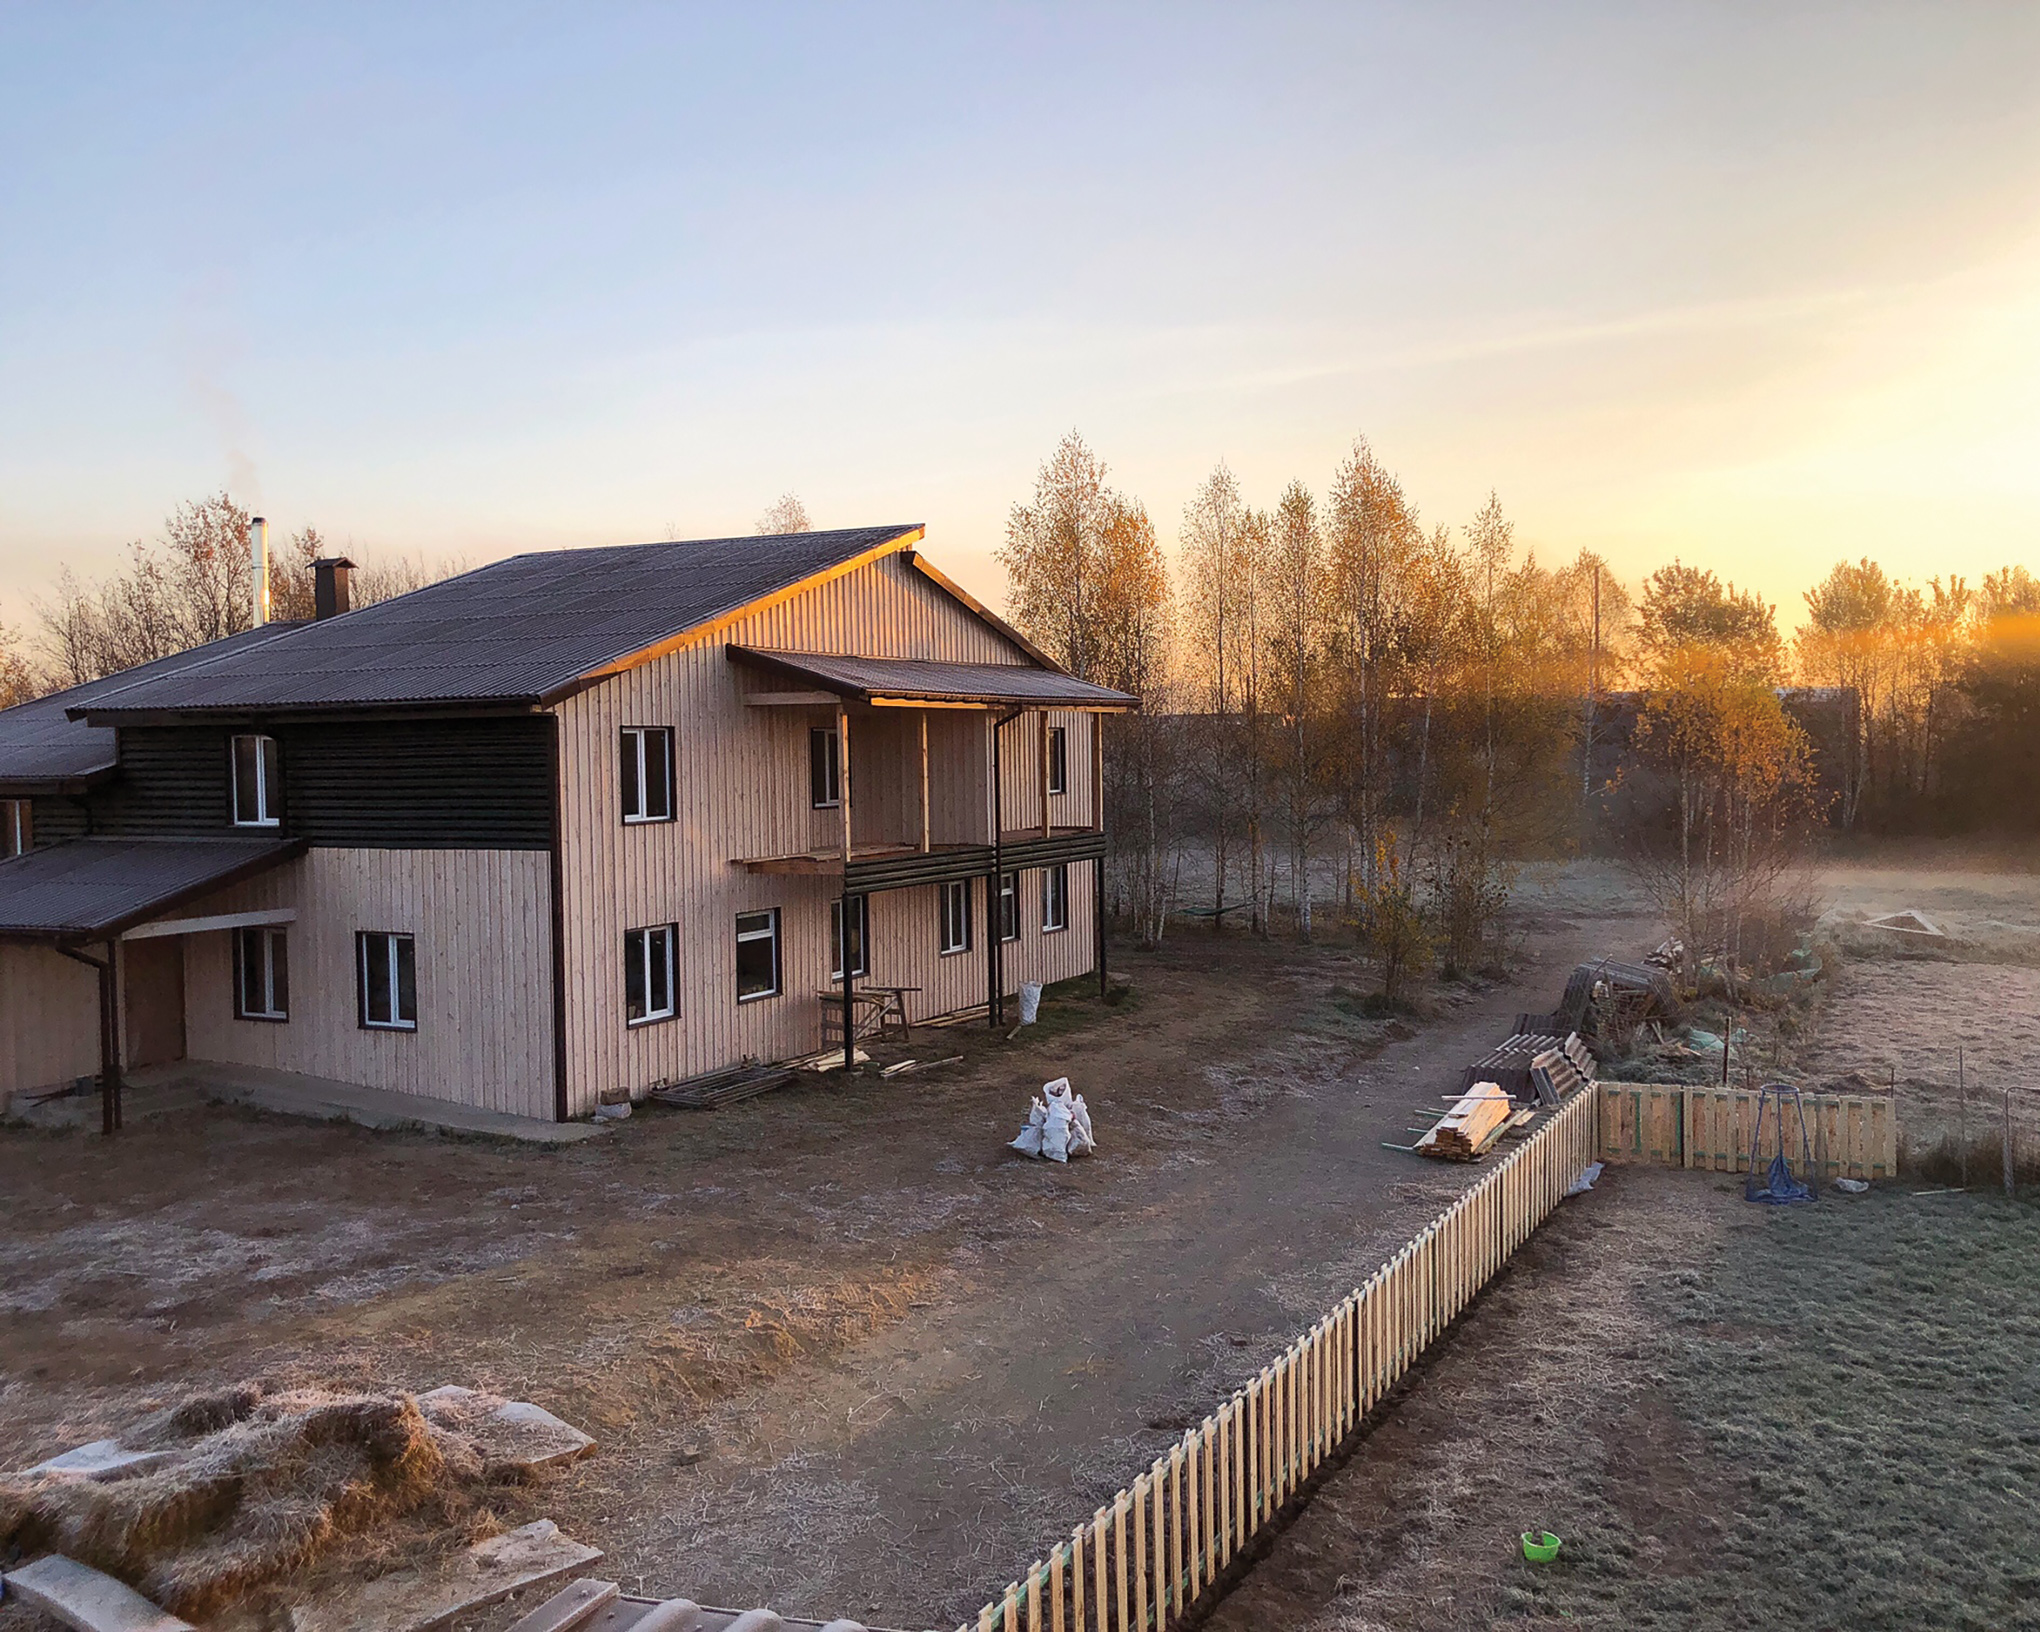 Golden sunrise lighting up a newly built apartment complex in the Ukraine countryside.